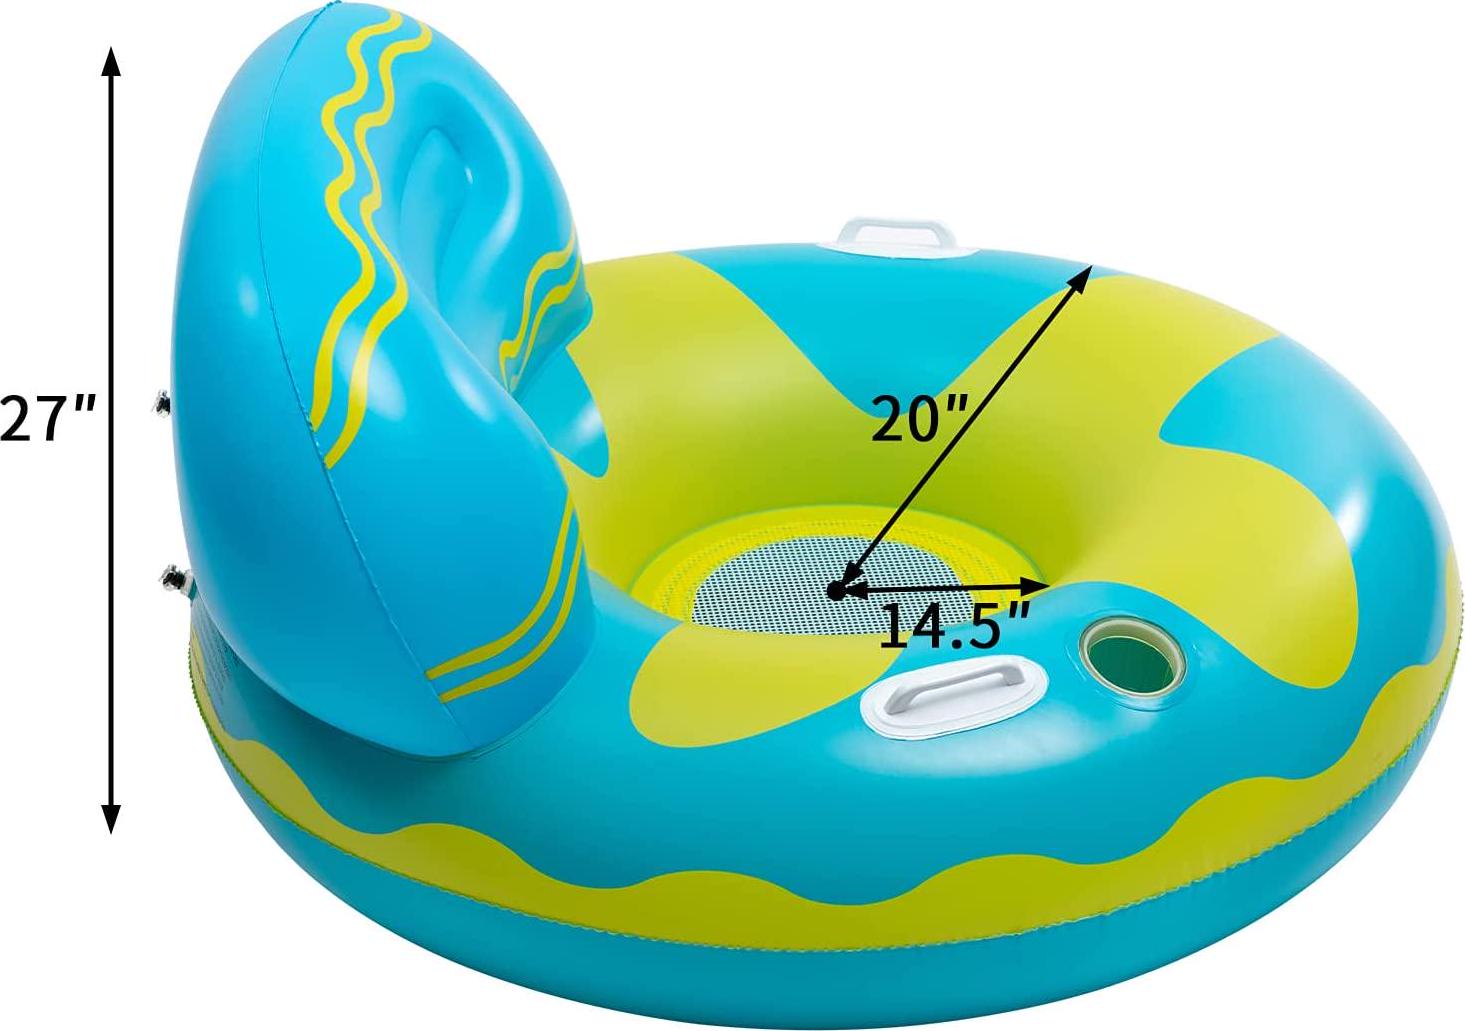 MATICO, MATICO Water Floating Sofa Inflatable Round Floating Row Swimming Pool Giant Shell Swim Floaties Summer Lounger Raft Beach Toys for Party